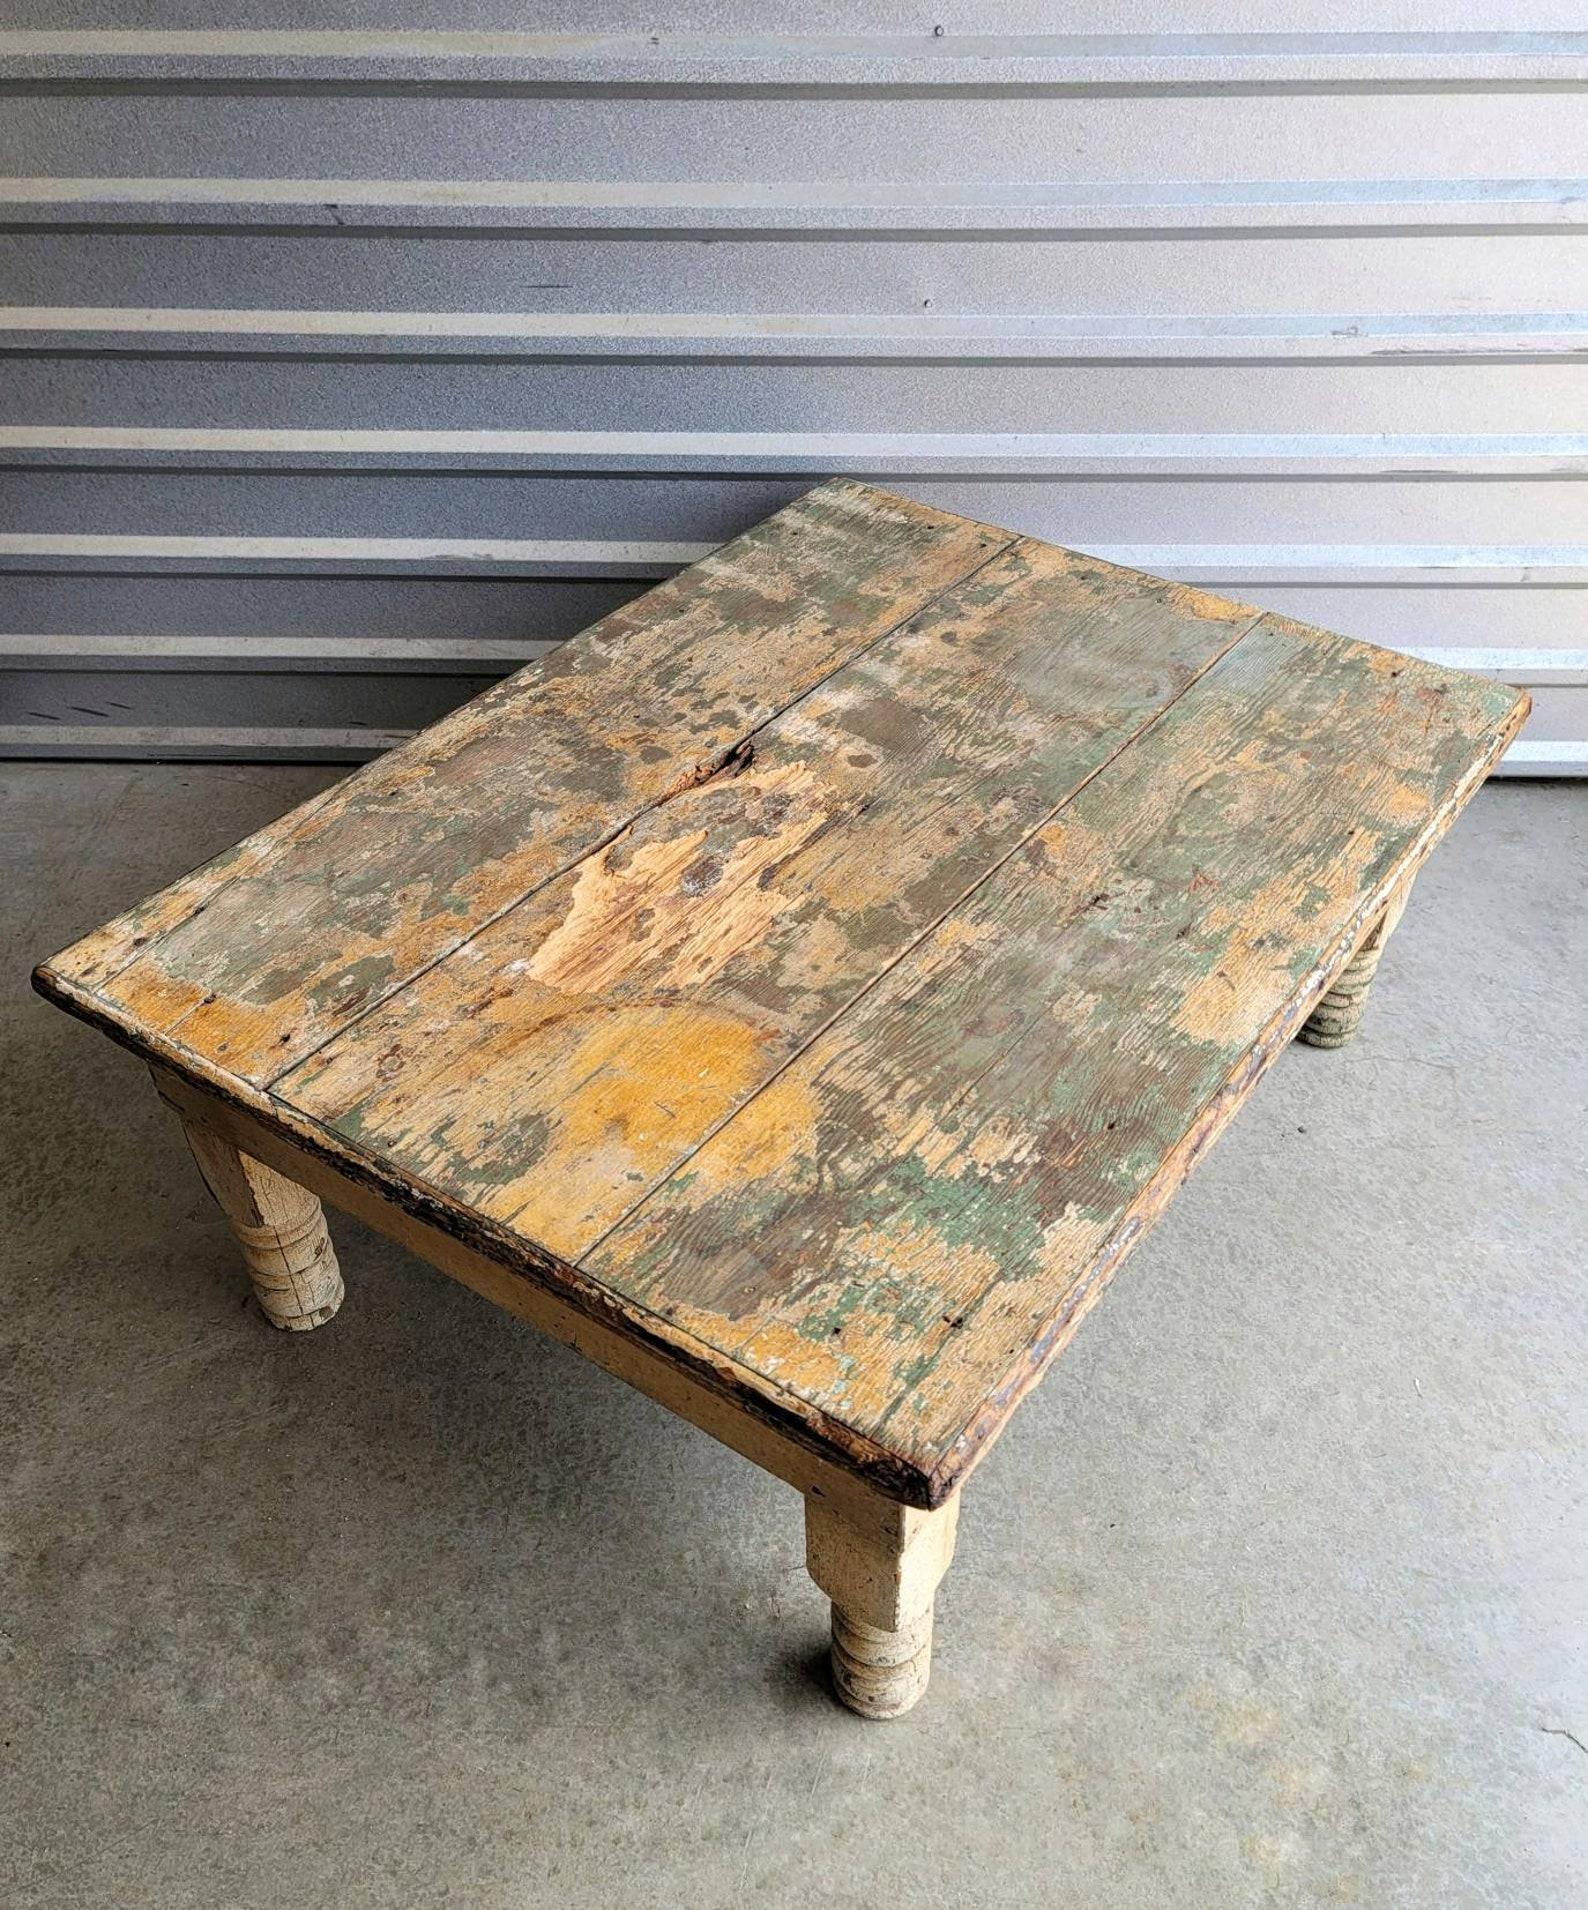 An antique, circa 1885, European low table, originally a Scottish farm house kitchen table / work table, the legs later cut down to make the perfect coffee table!

Hand-crafted in Scotland in the late 19th century, good quality rustic Victorian